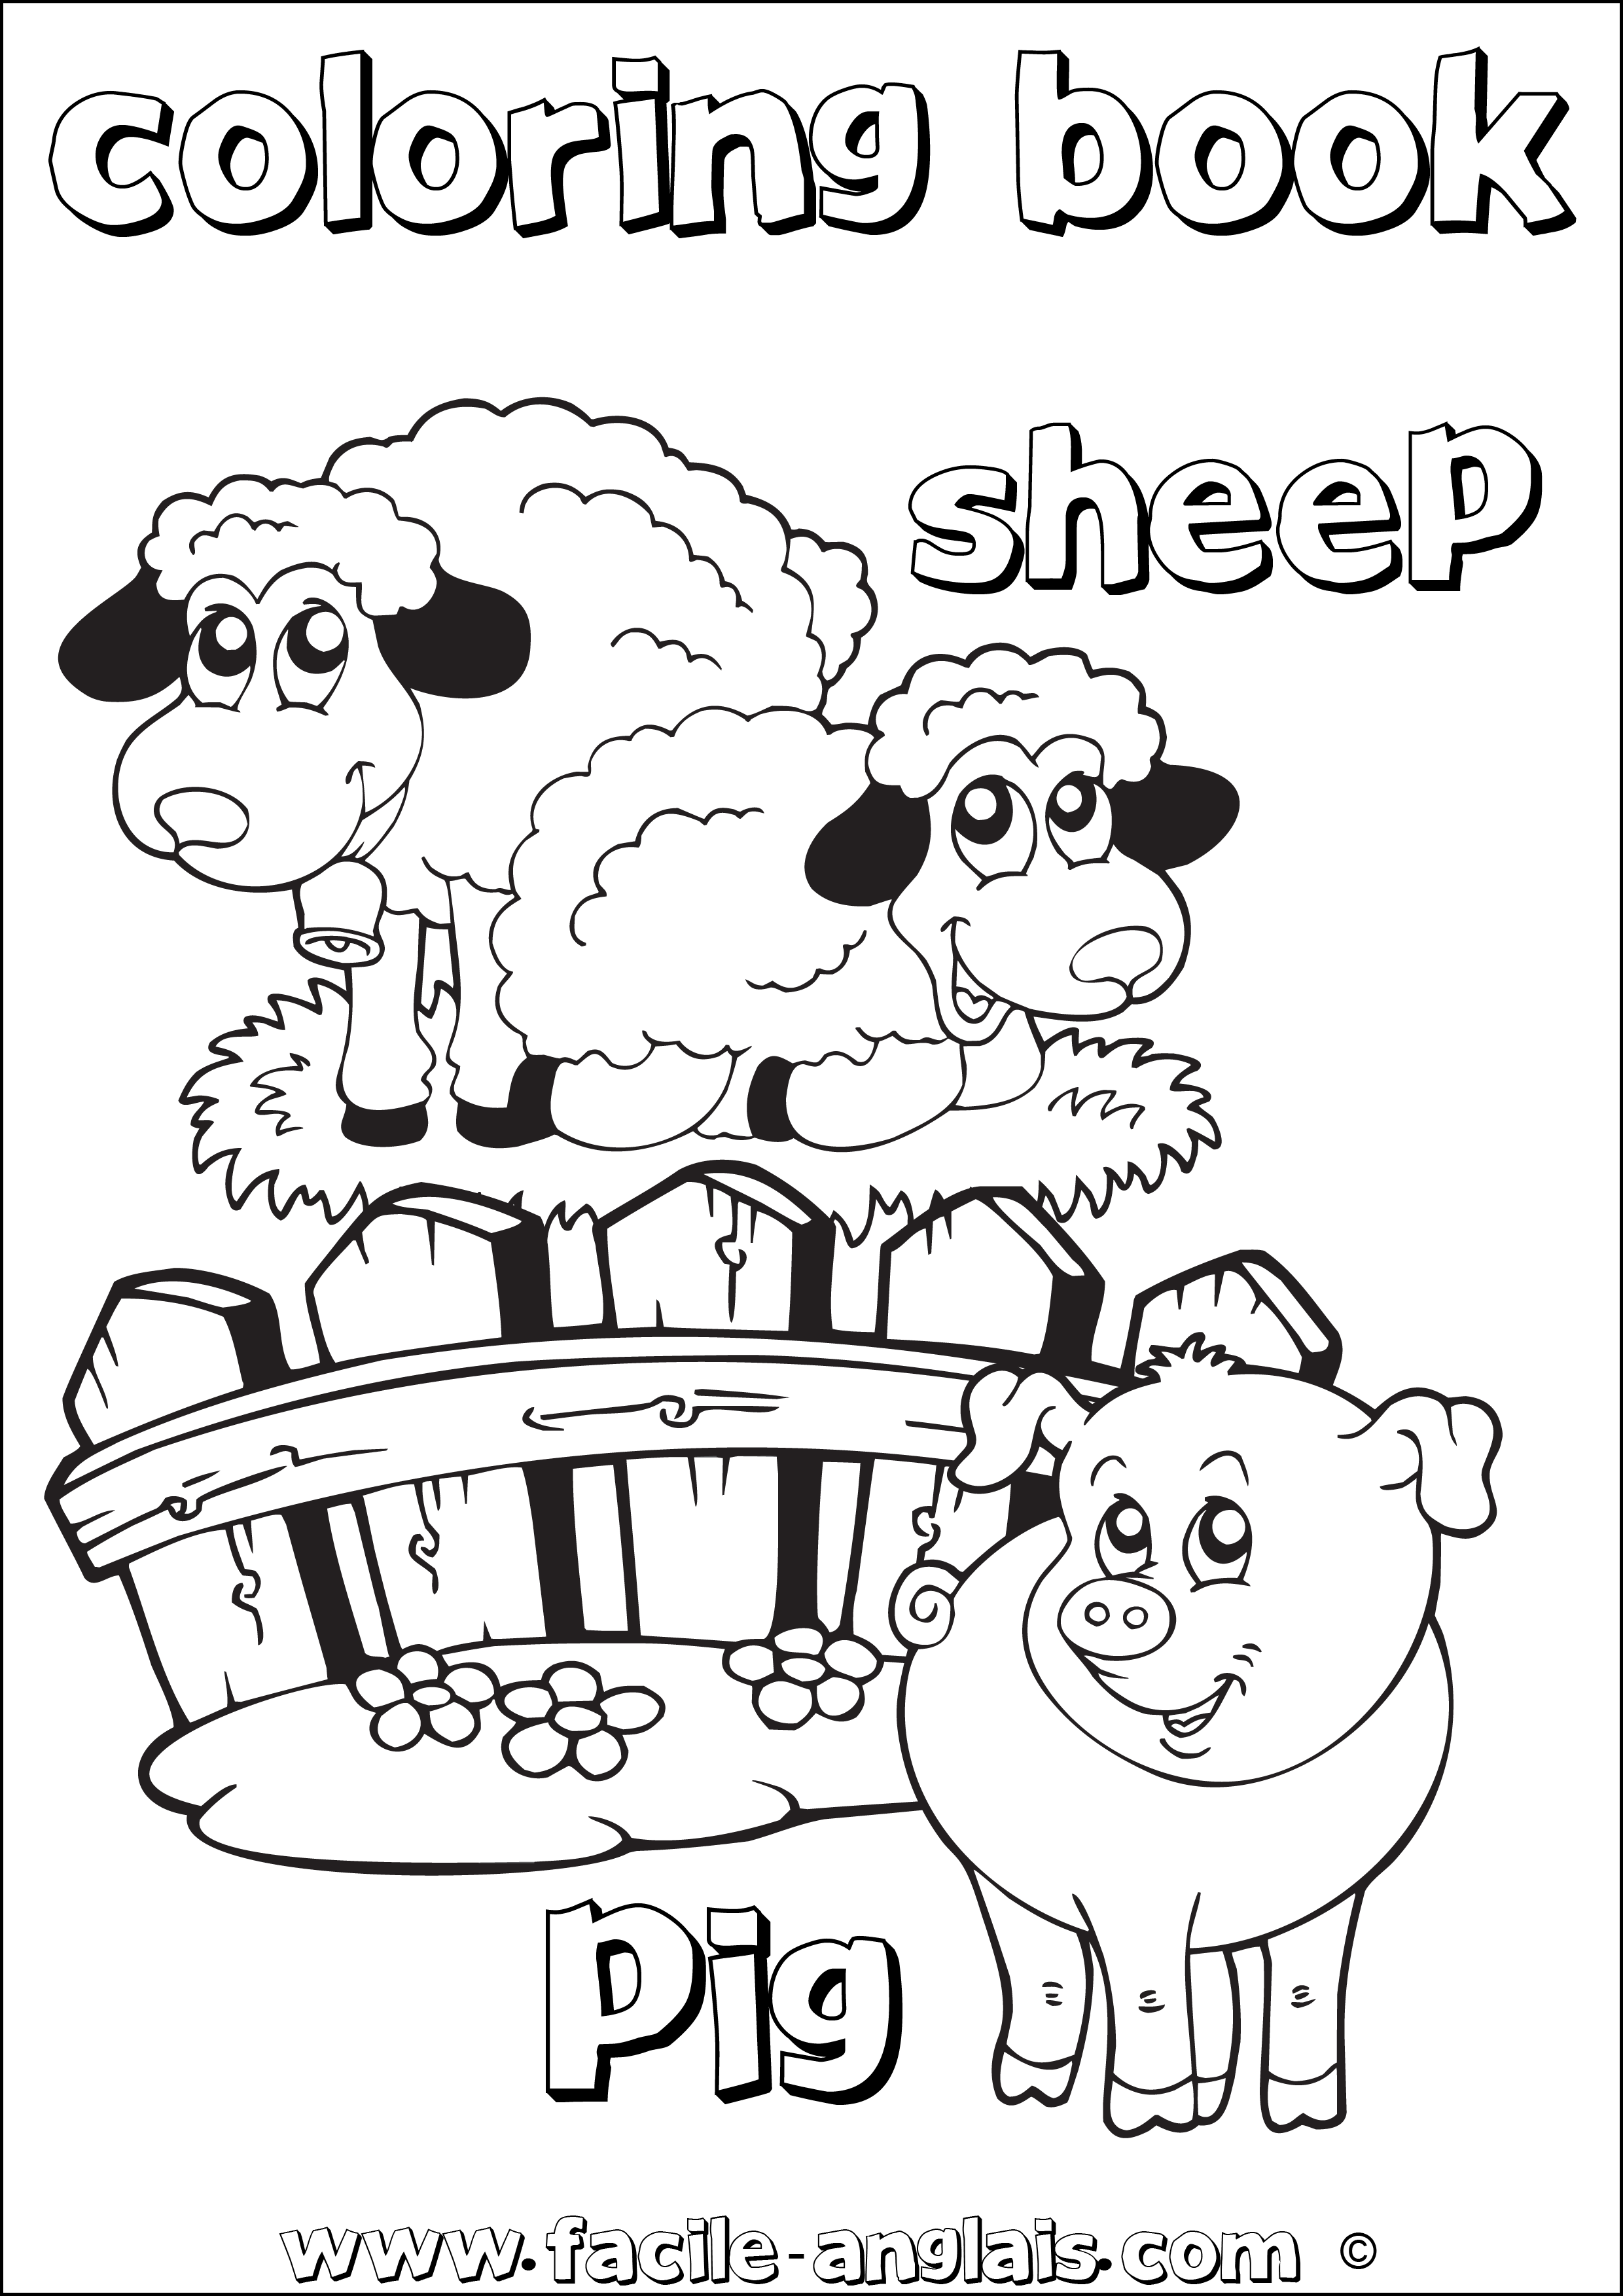 Coloring Book Sheep and Pig (Coloriage Moutons et cochon)